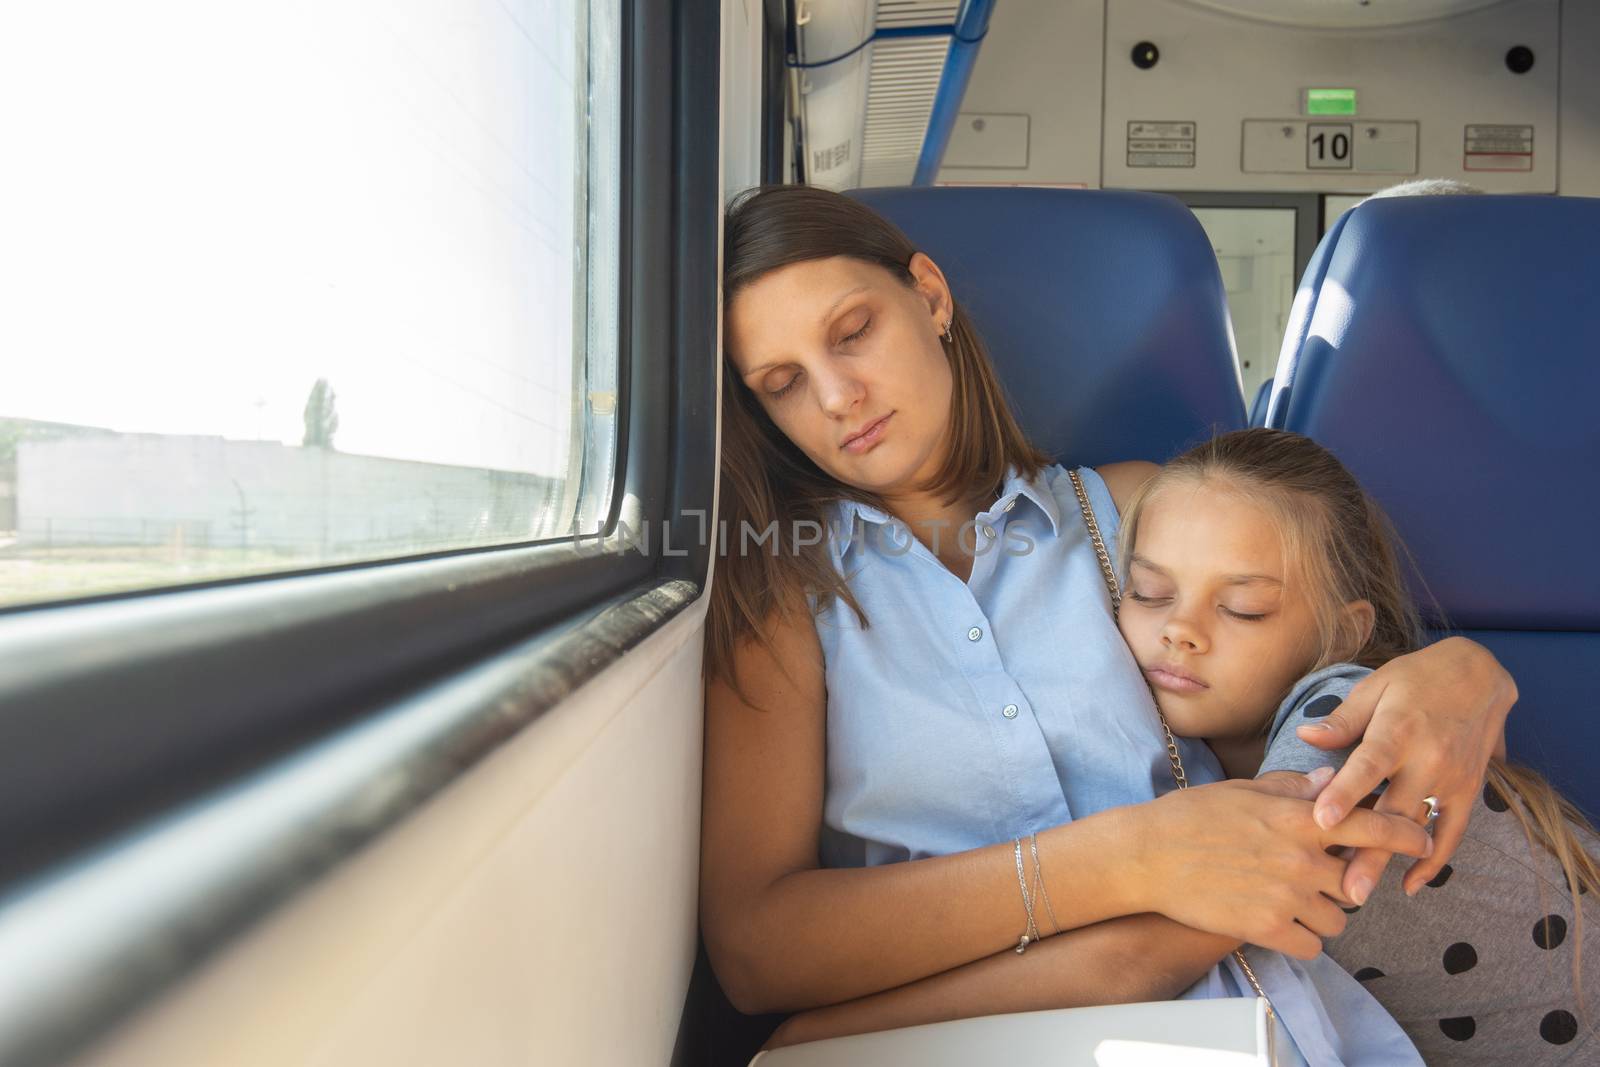 Mom and daughter hugging sleeping in a train car by Madhourse